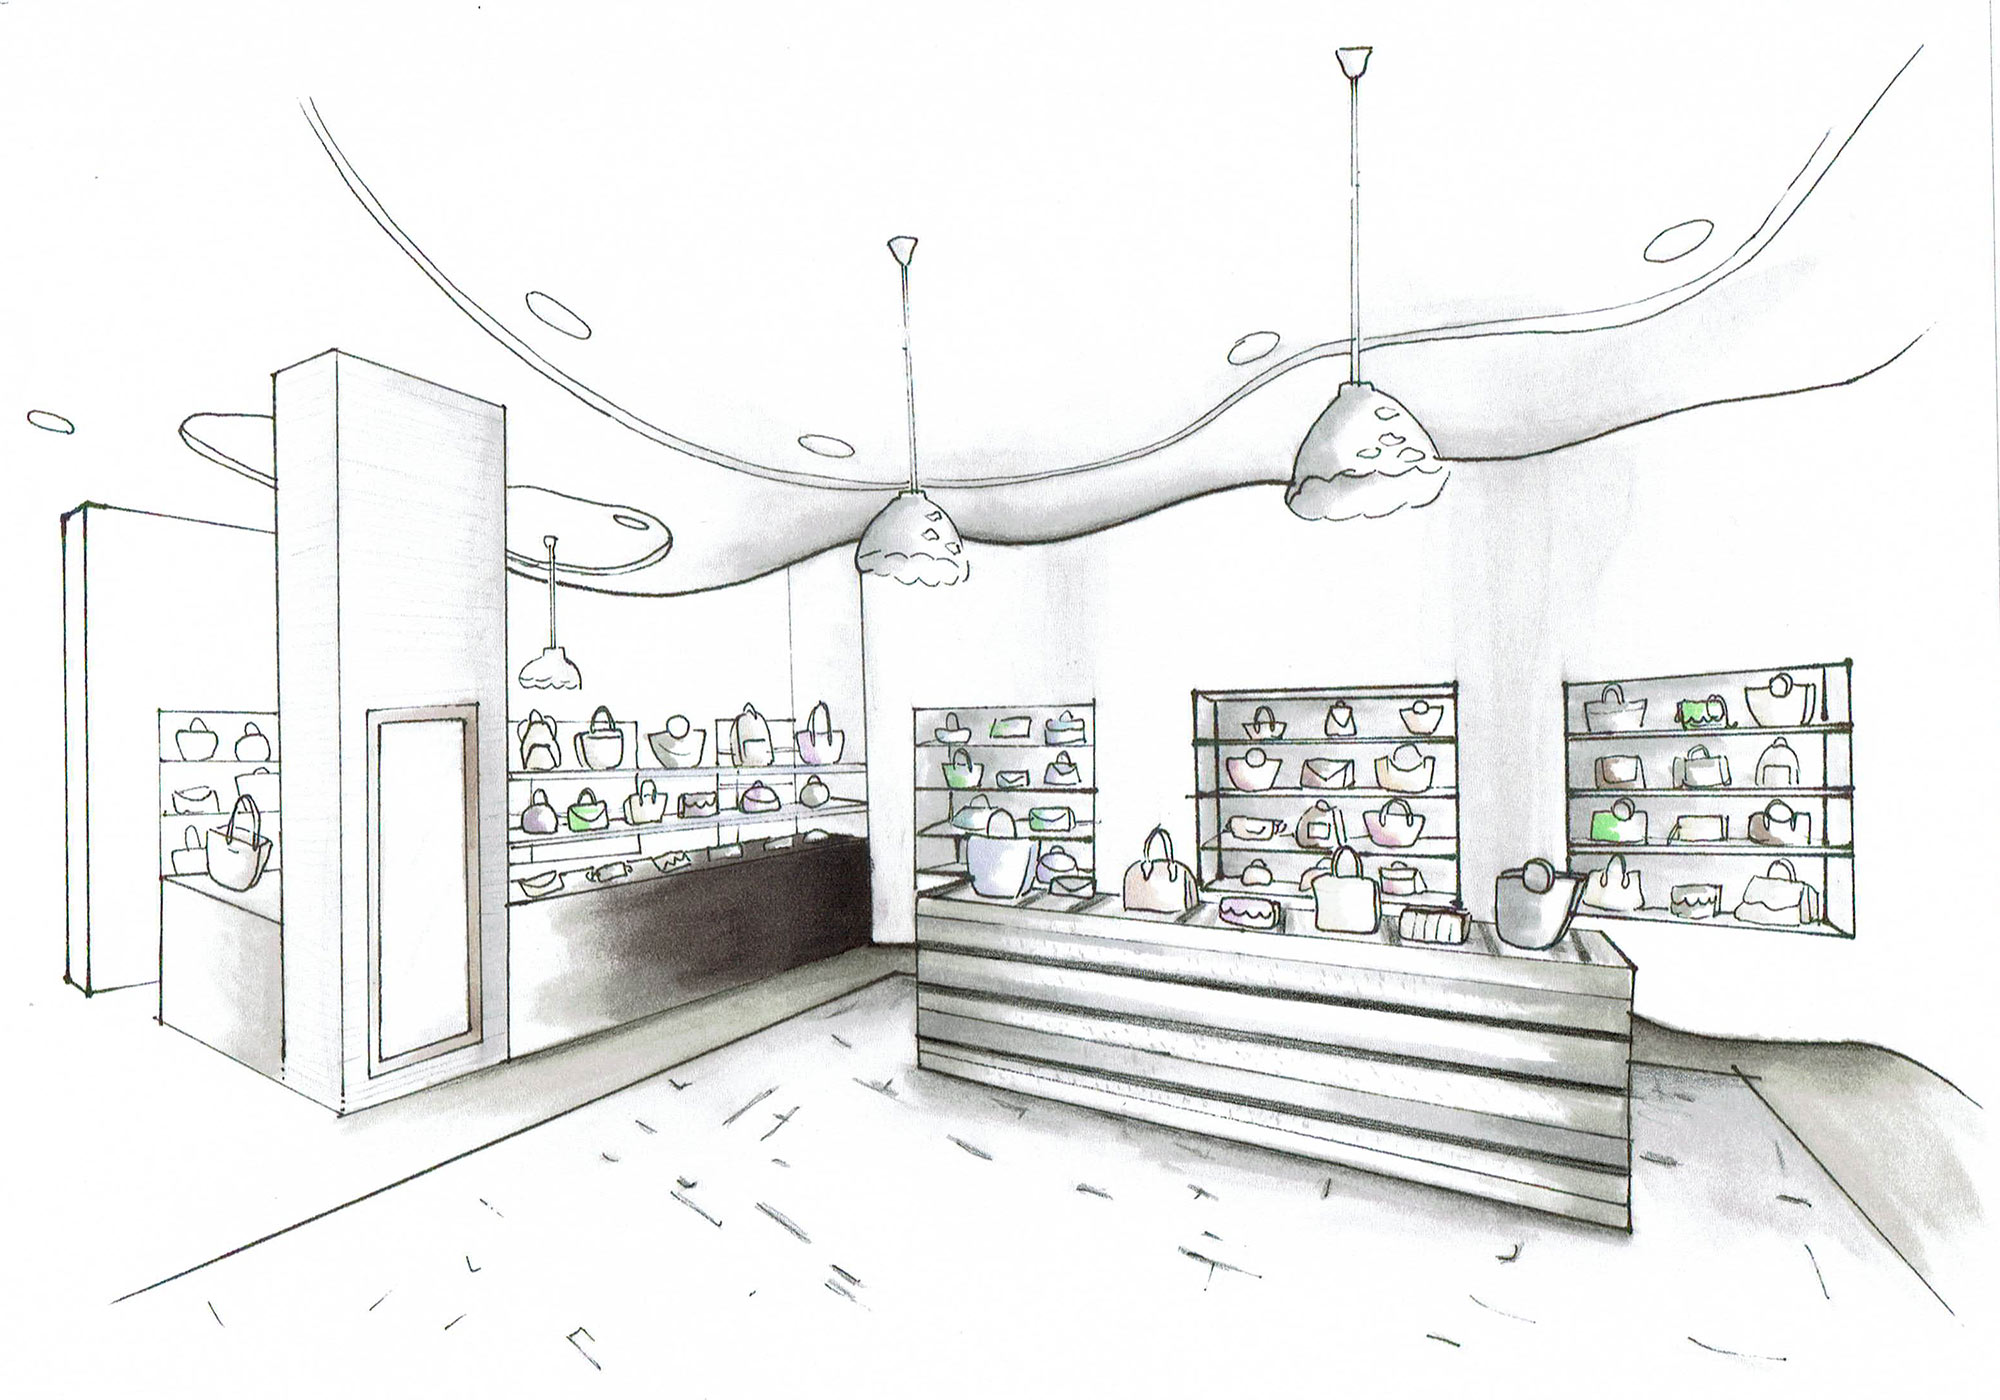 hand rendering of what looks like the inside of a purse shop